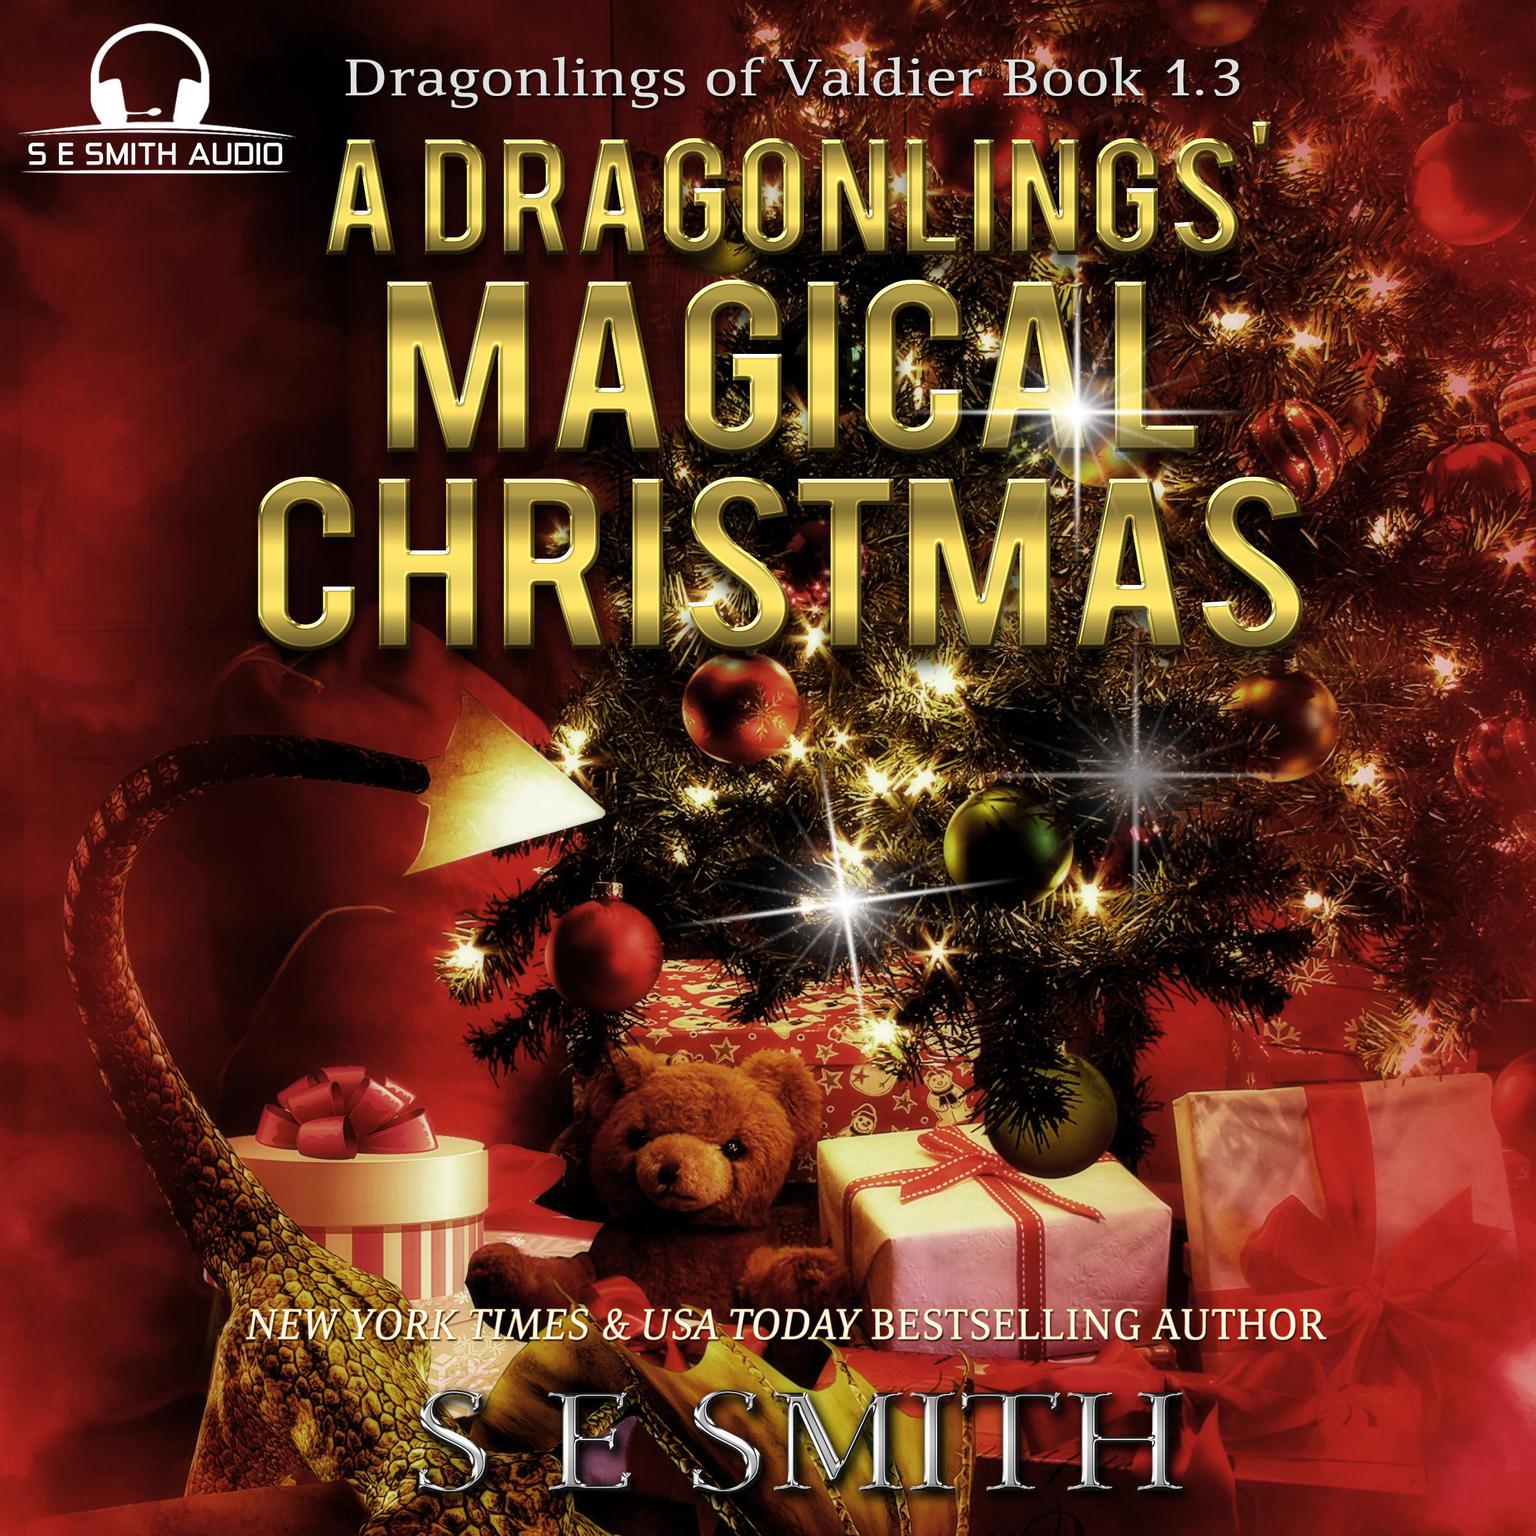 A Dragonlings Magical Christmas Audiobook, by S.E. Smith